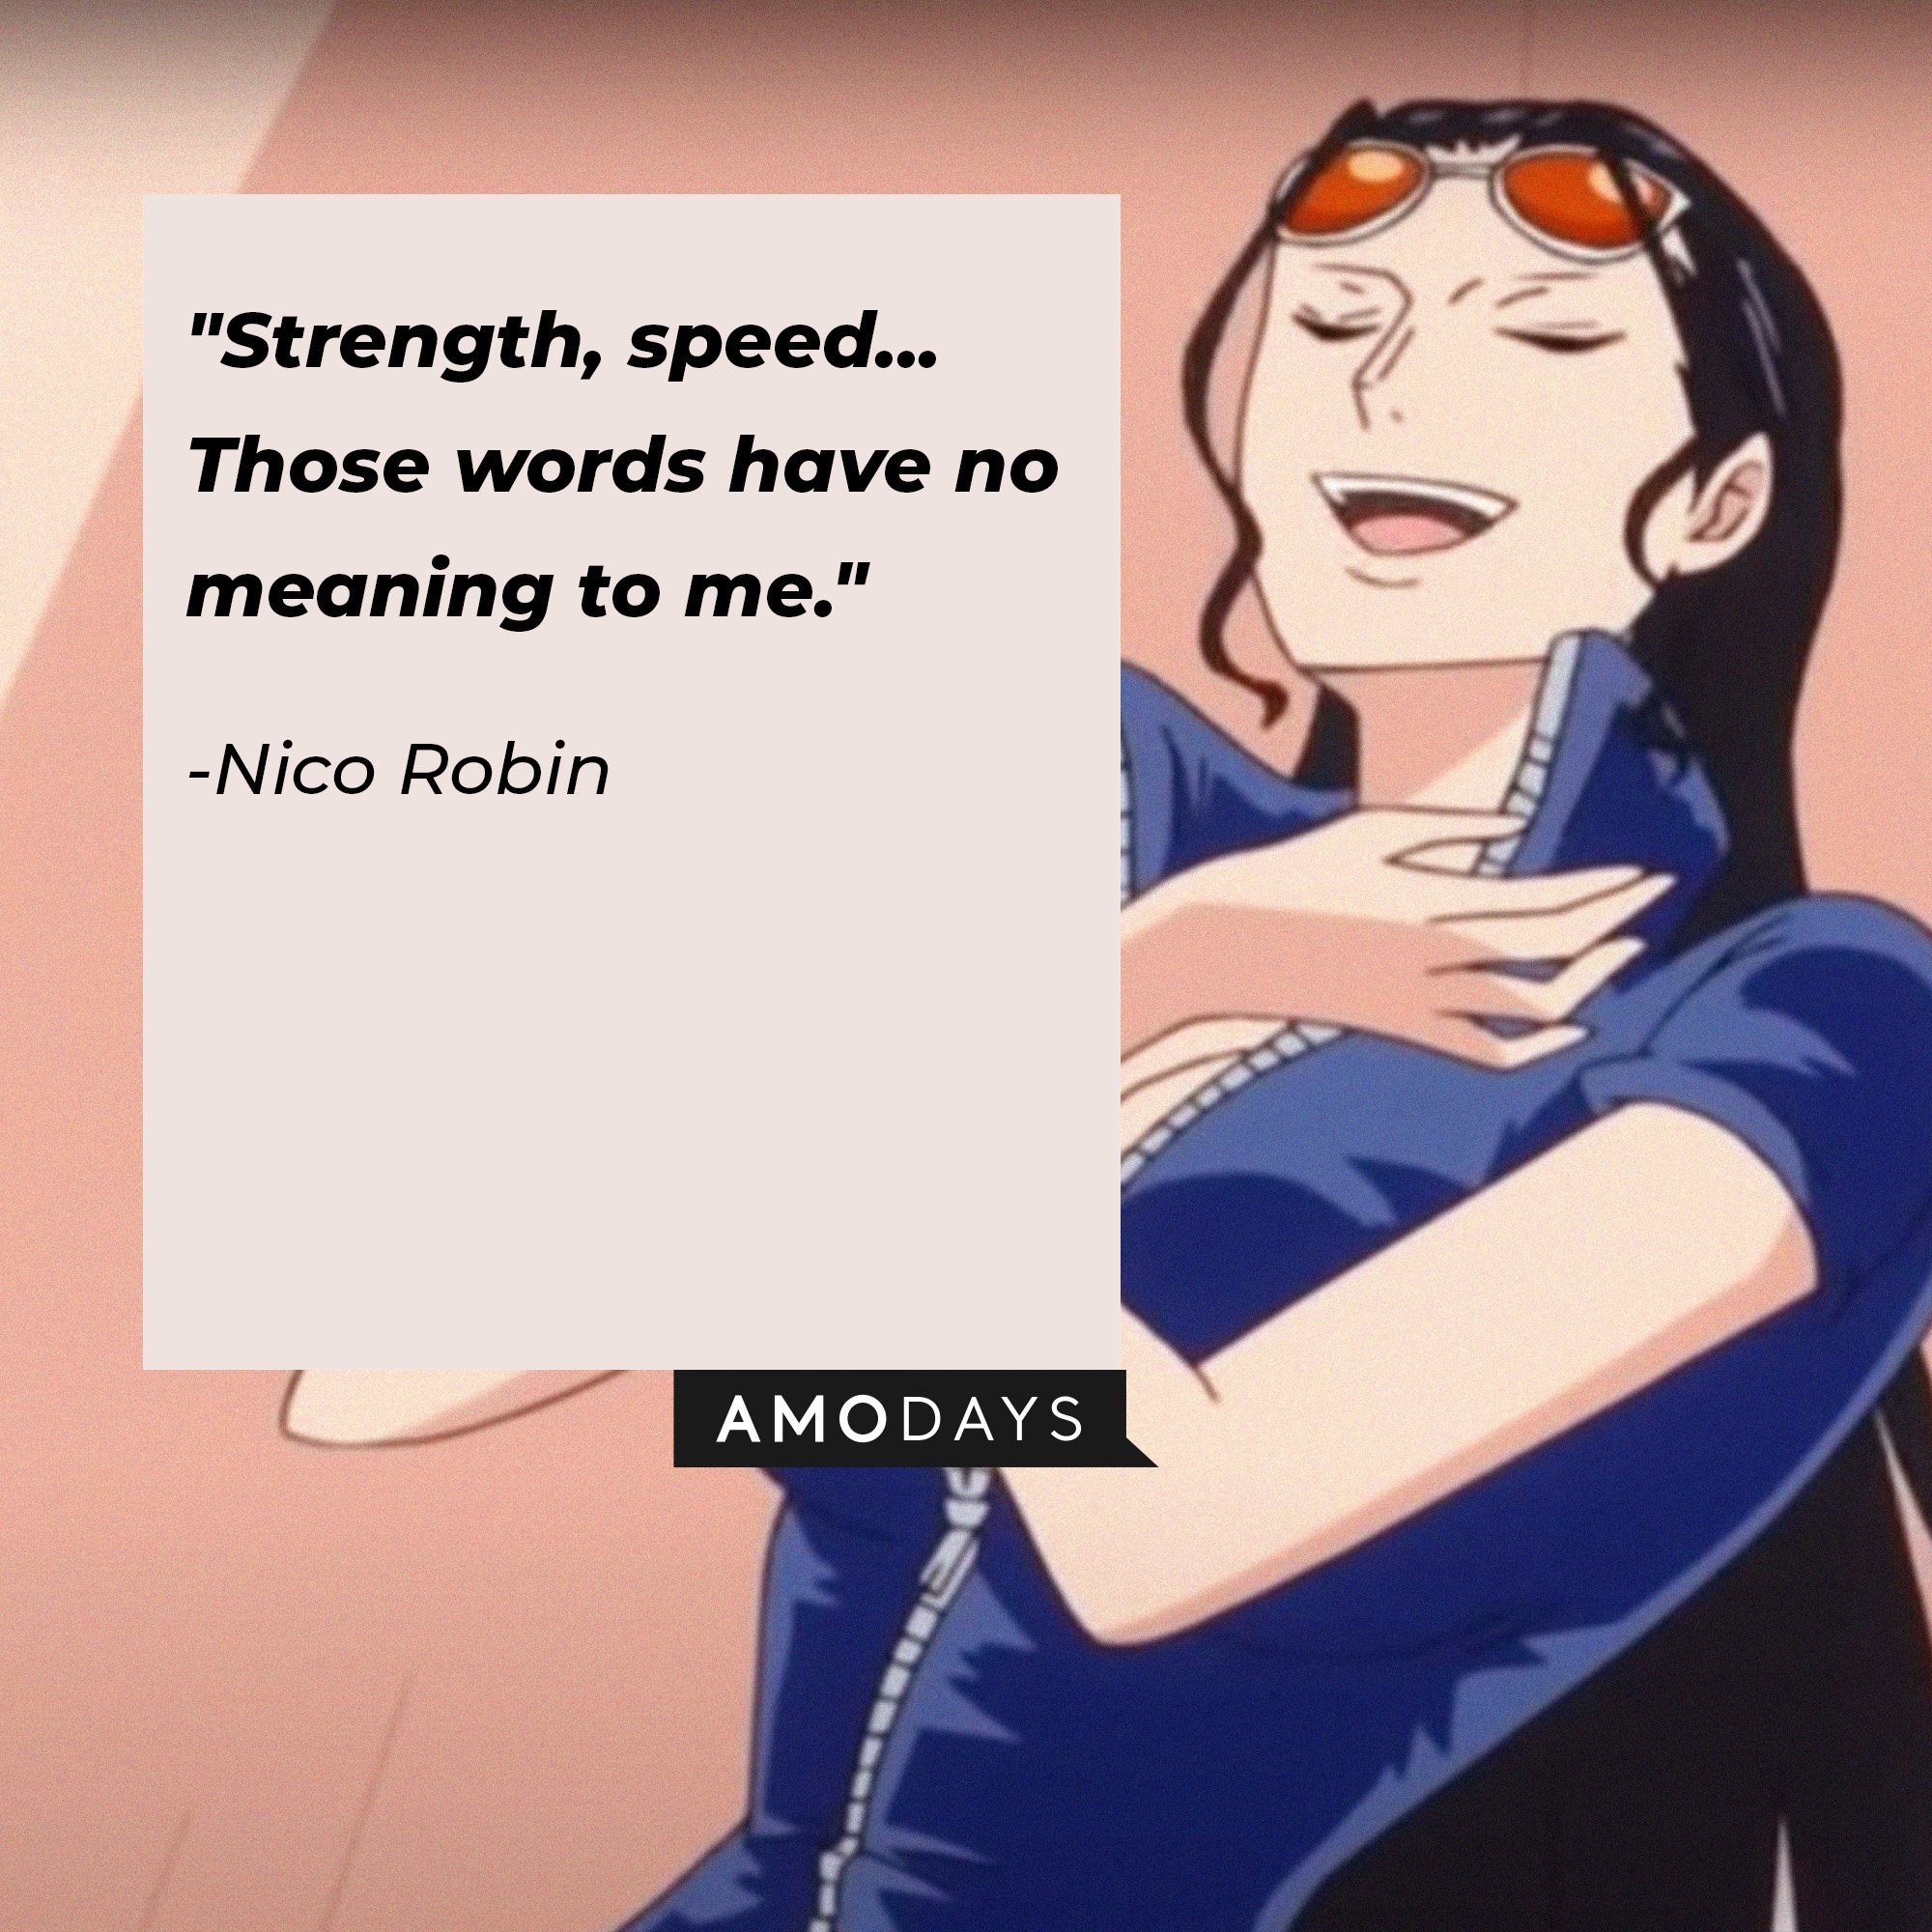 Nico Robin's quote: "Strength, speed... Those words have no meaning to me." | Image: AmoDays